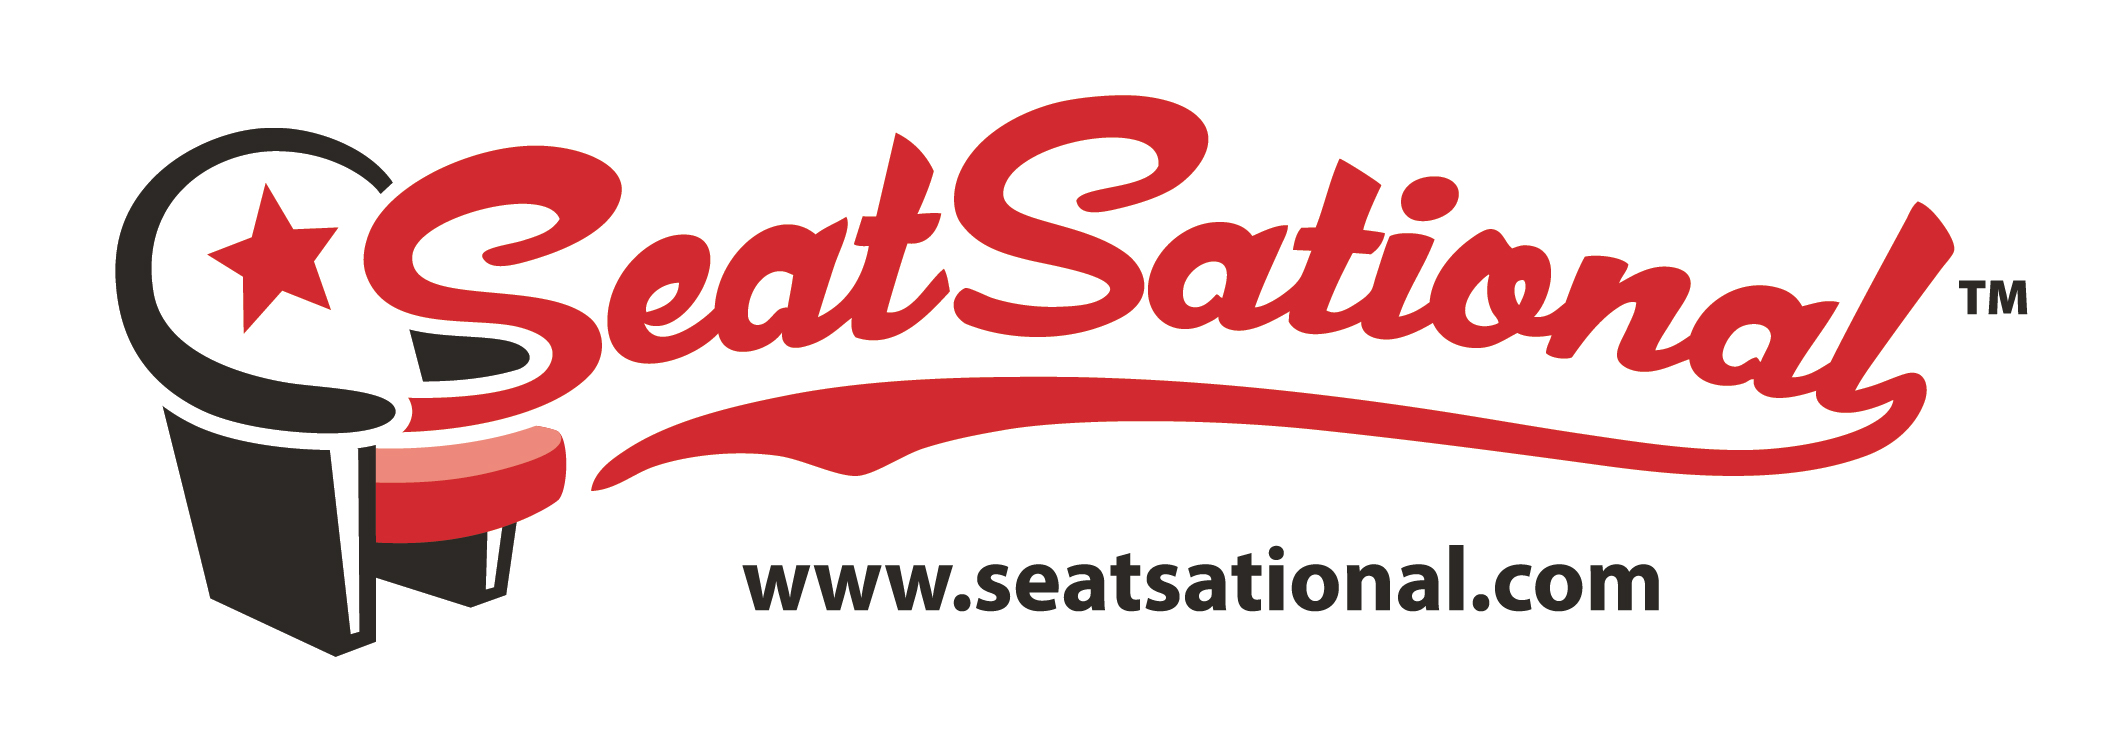 SeatSational Logo - Stadium Advertising by SeatSational™ is the perfect way to convince a sponsor, add value for a client or impress a guest!